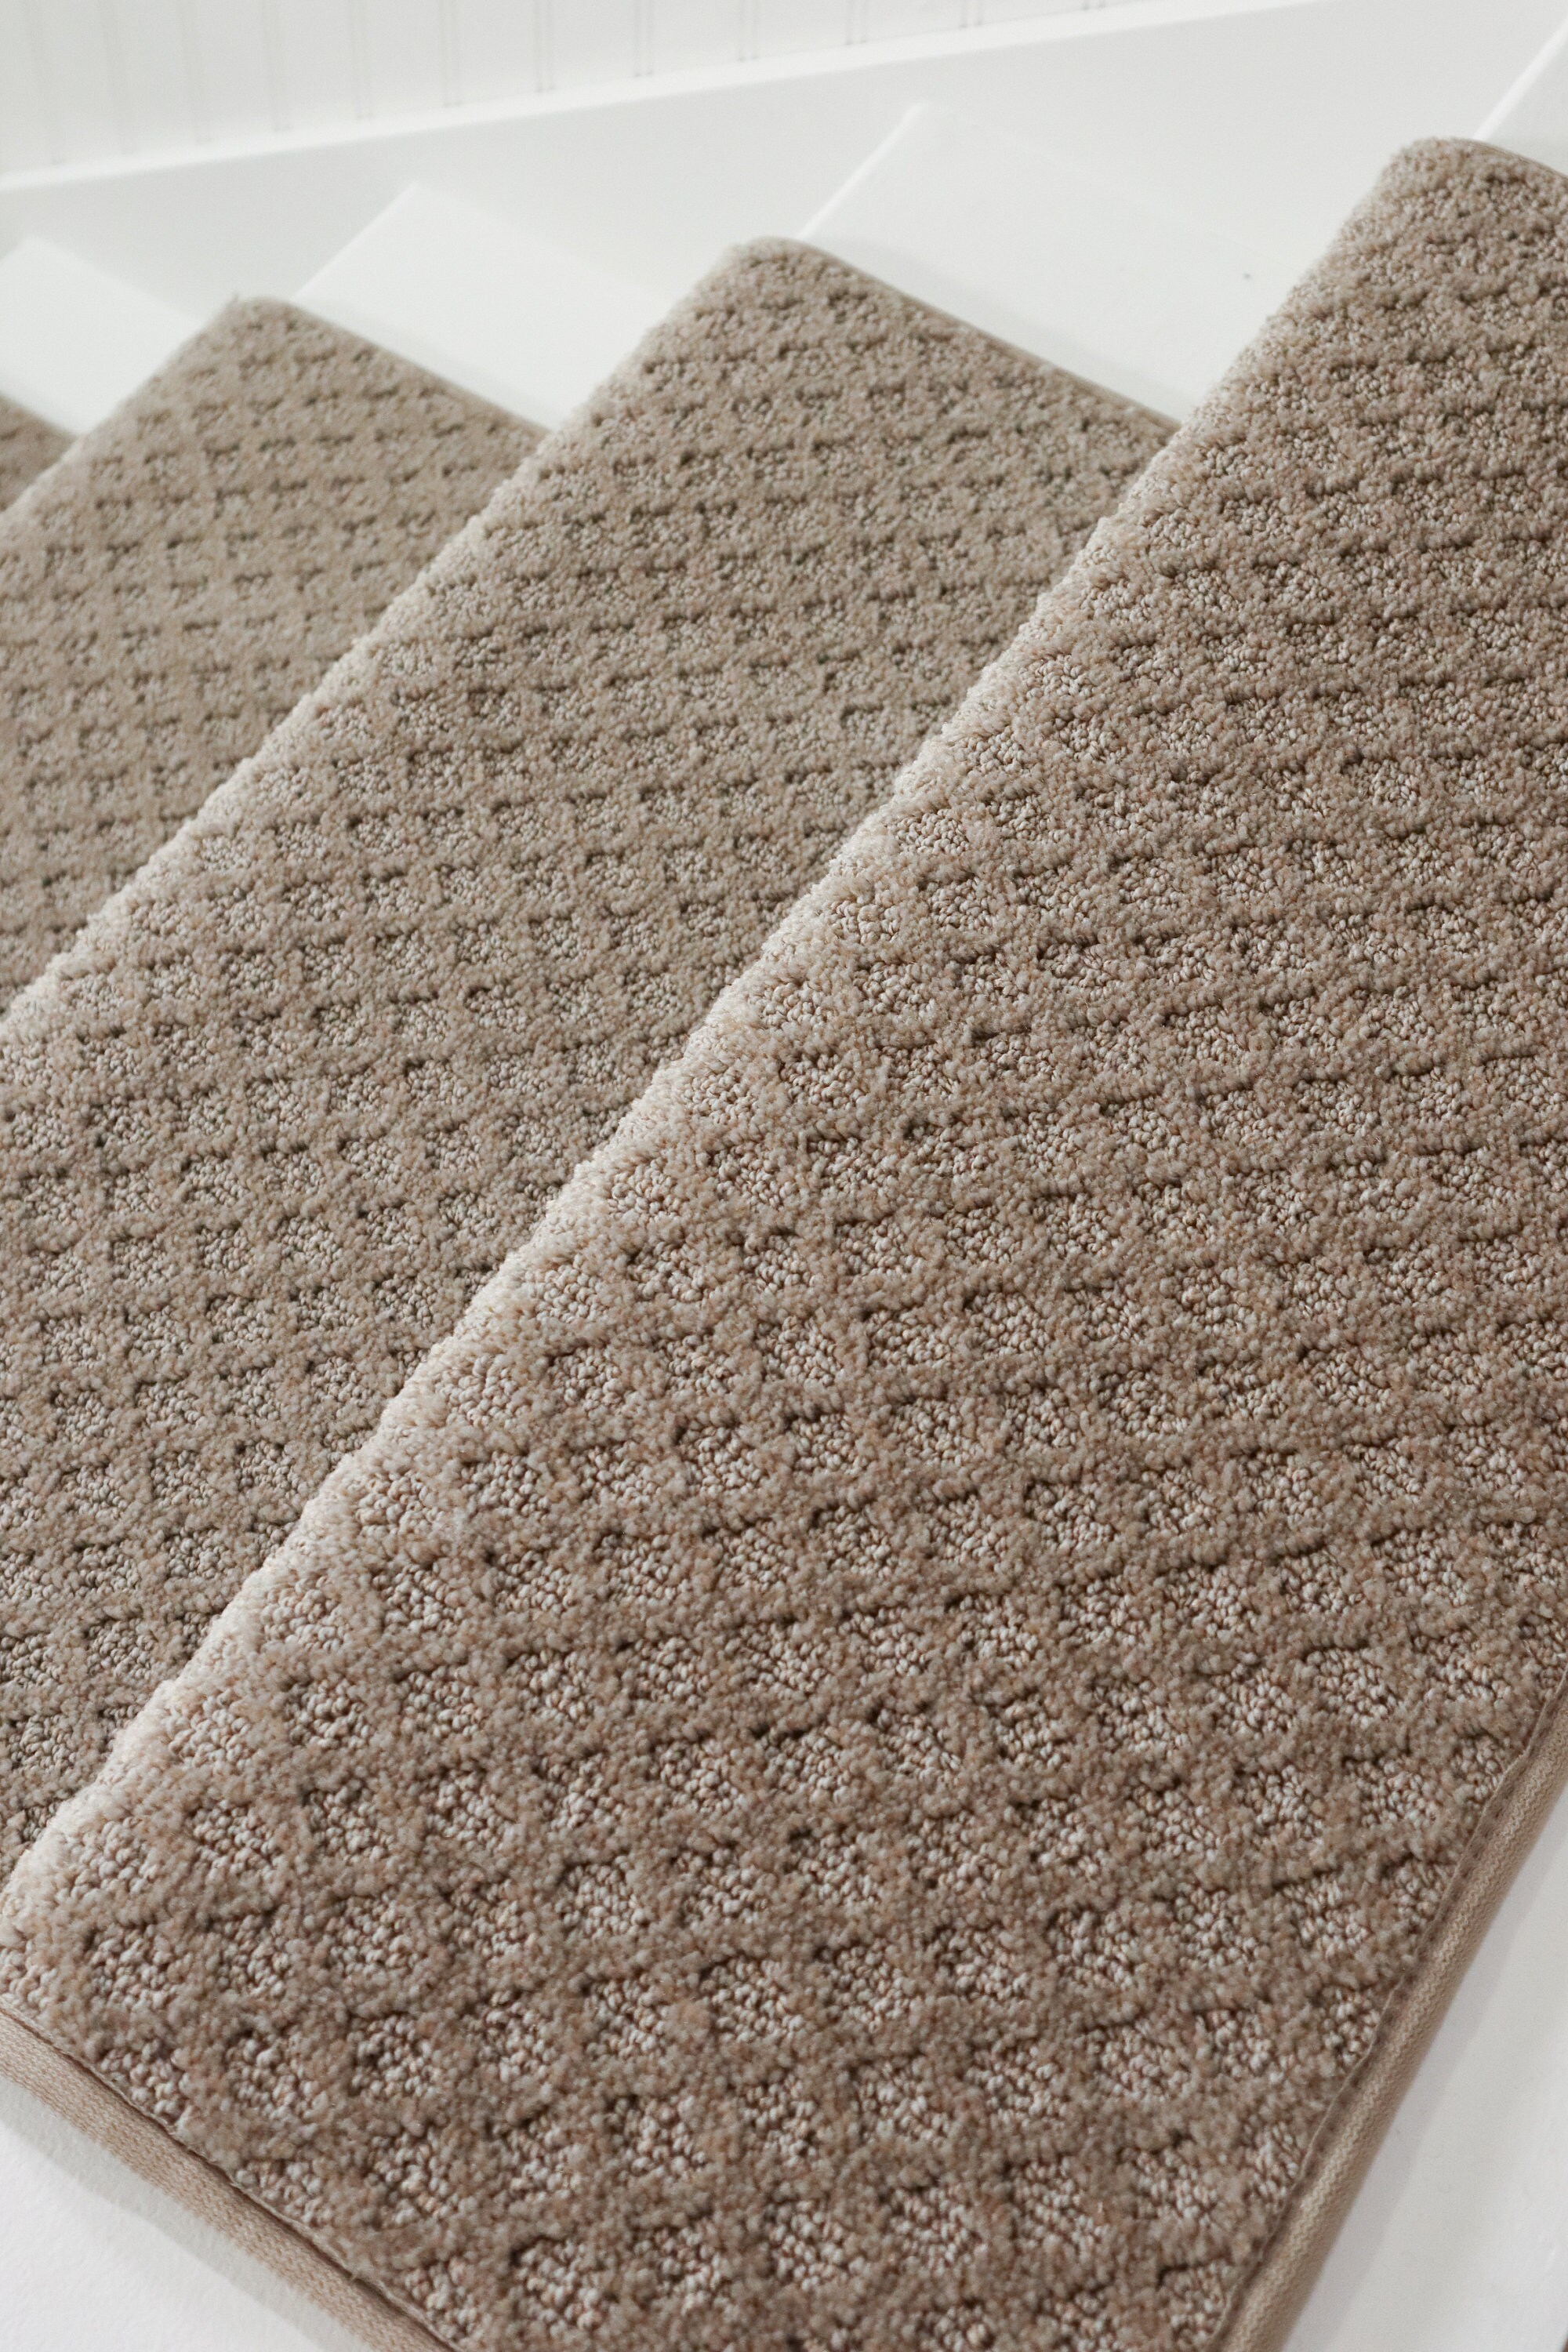 CarpetKrin - Non-Slip Carpet Trim Tack-on for Carpeted Stairs